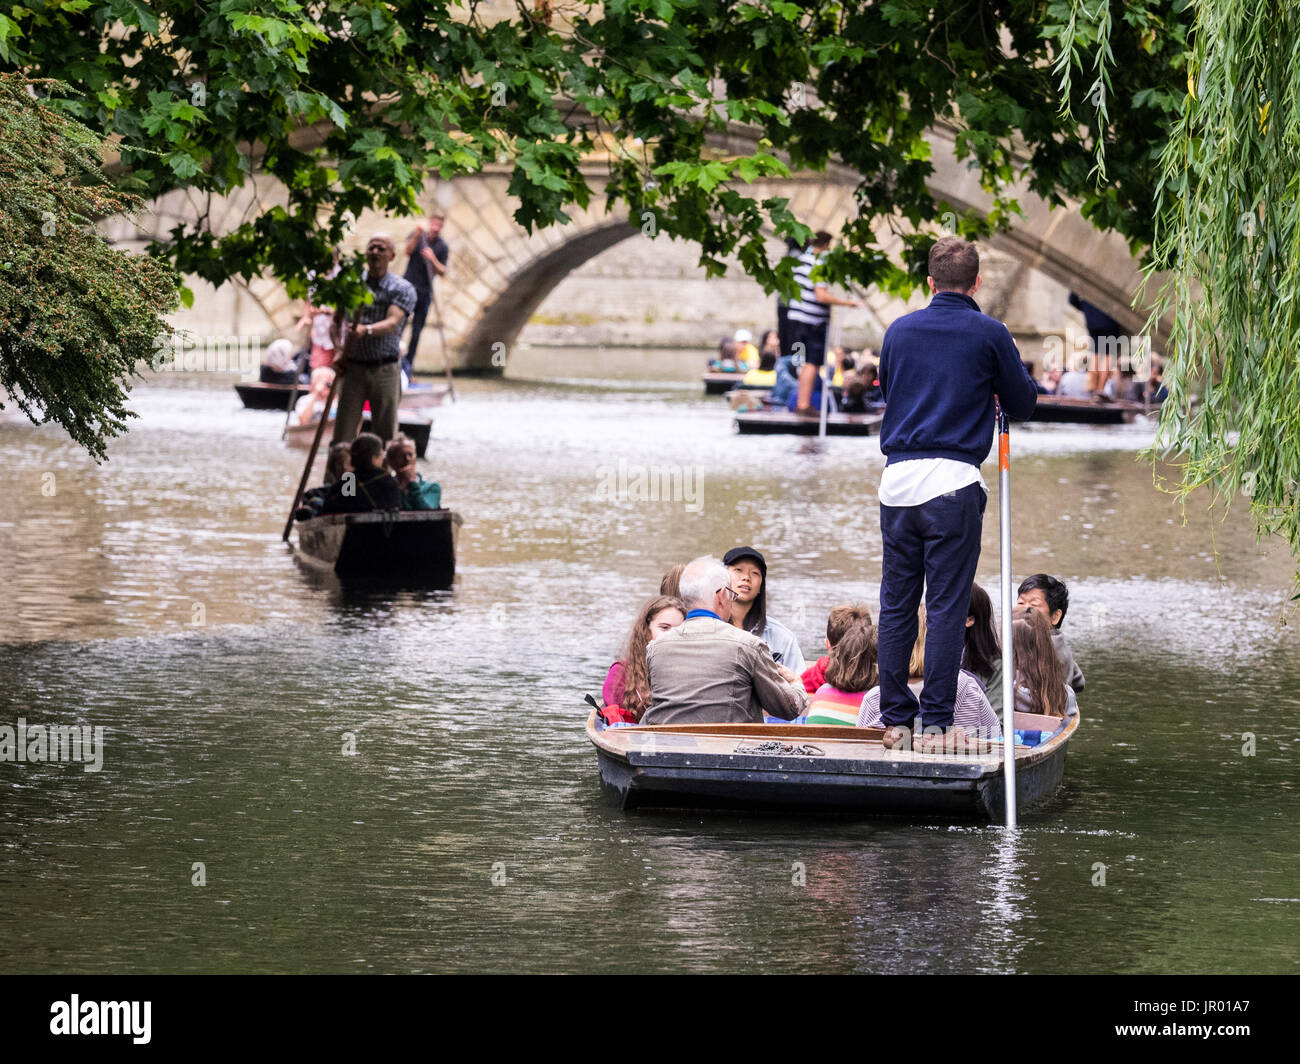 Cambridge Tourism - Punting on the River Cam in Cambridge UK Stock Photo